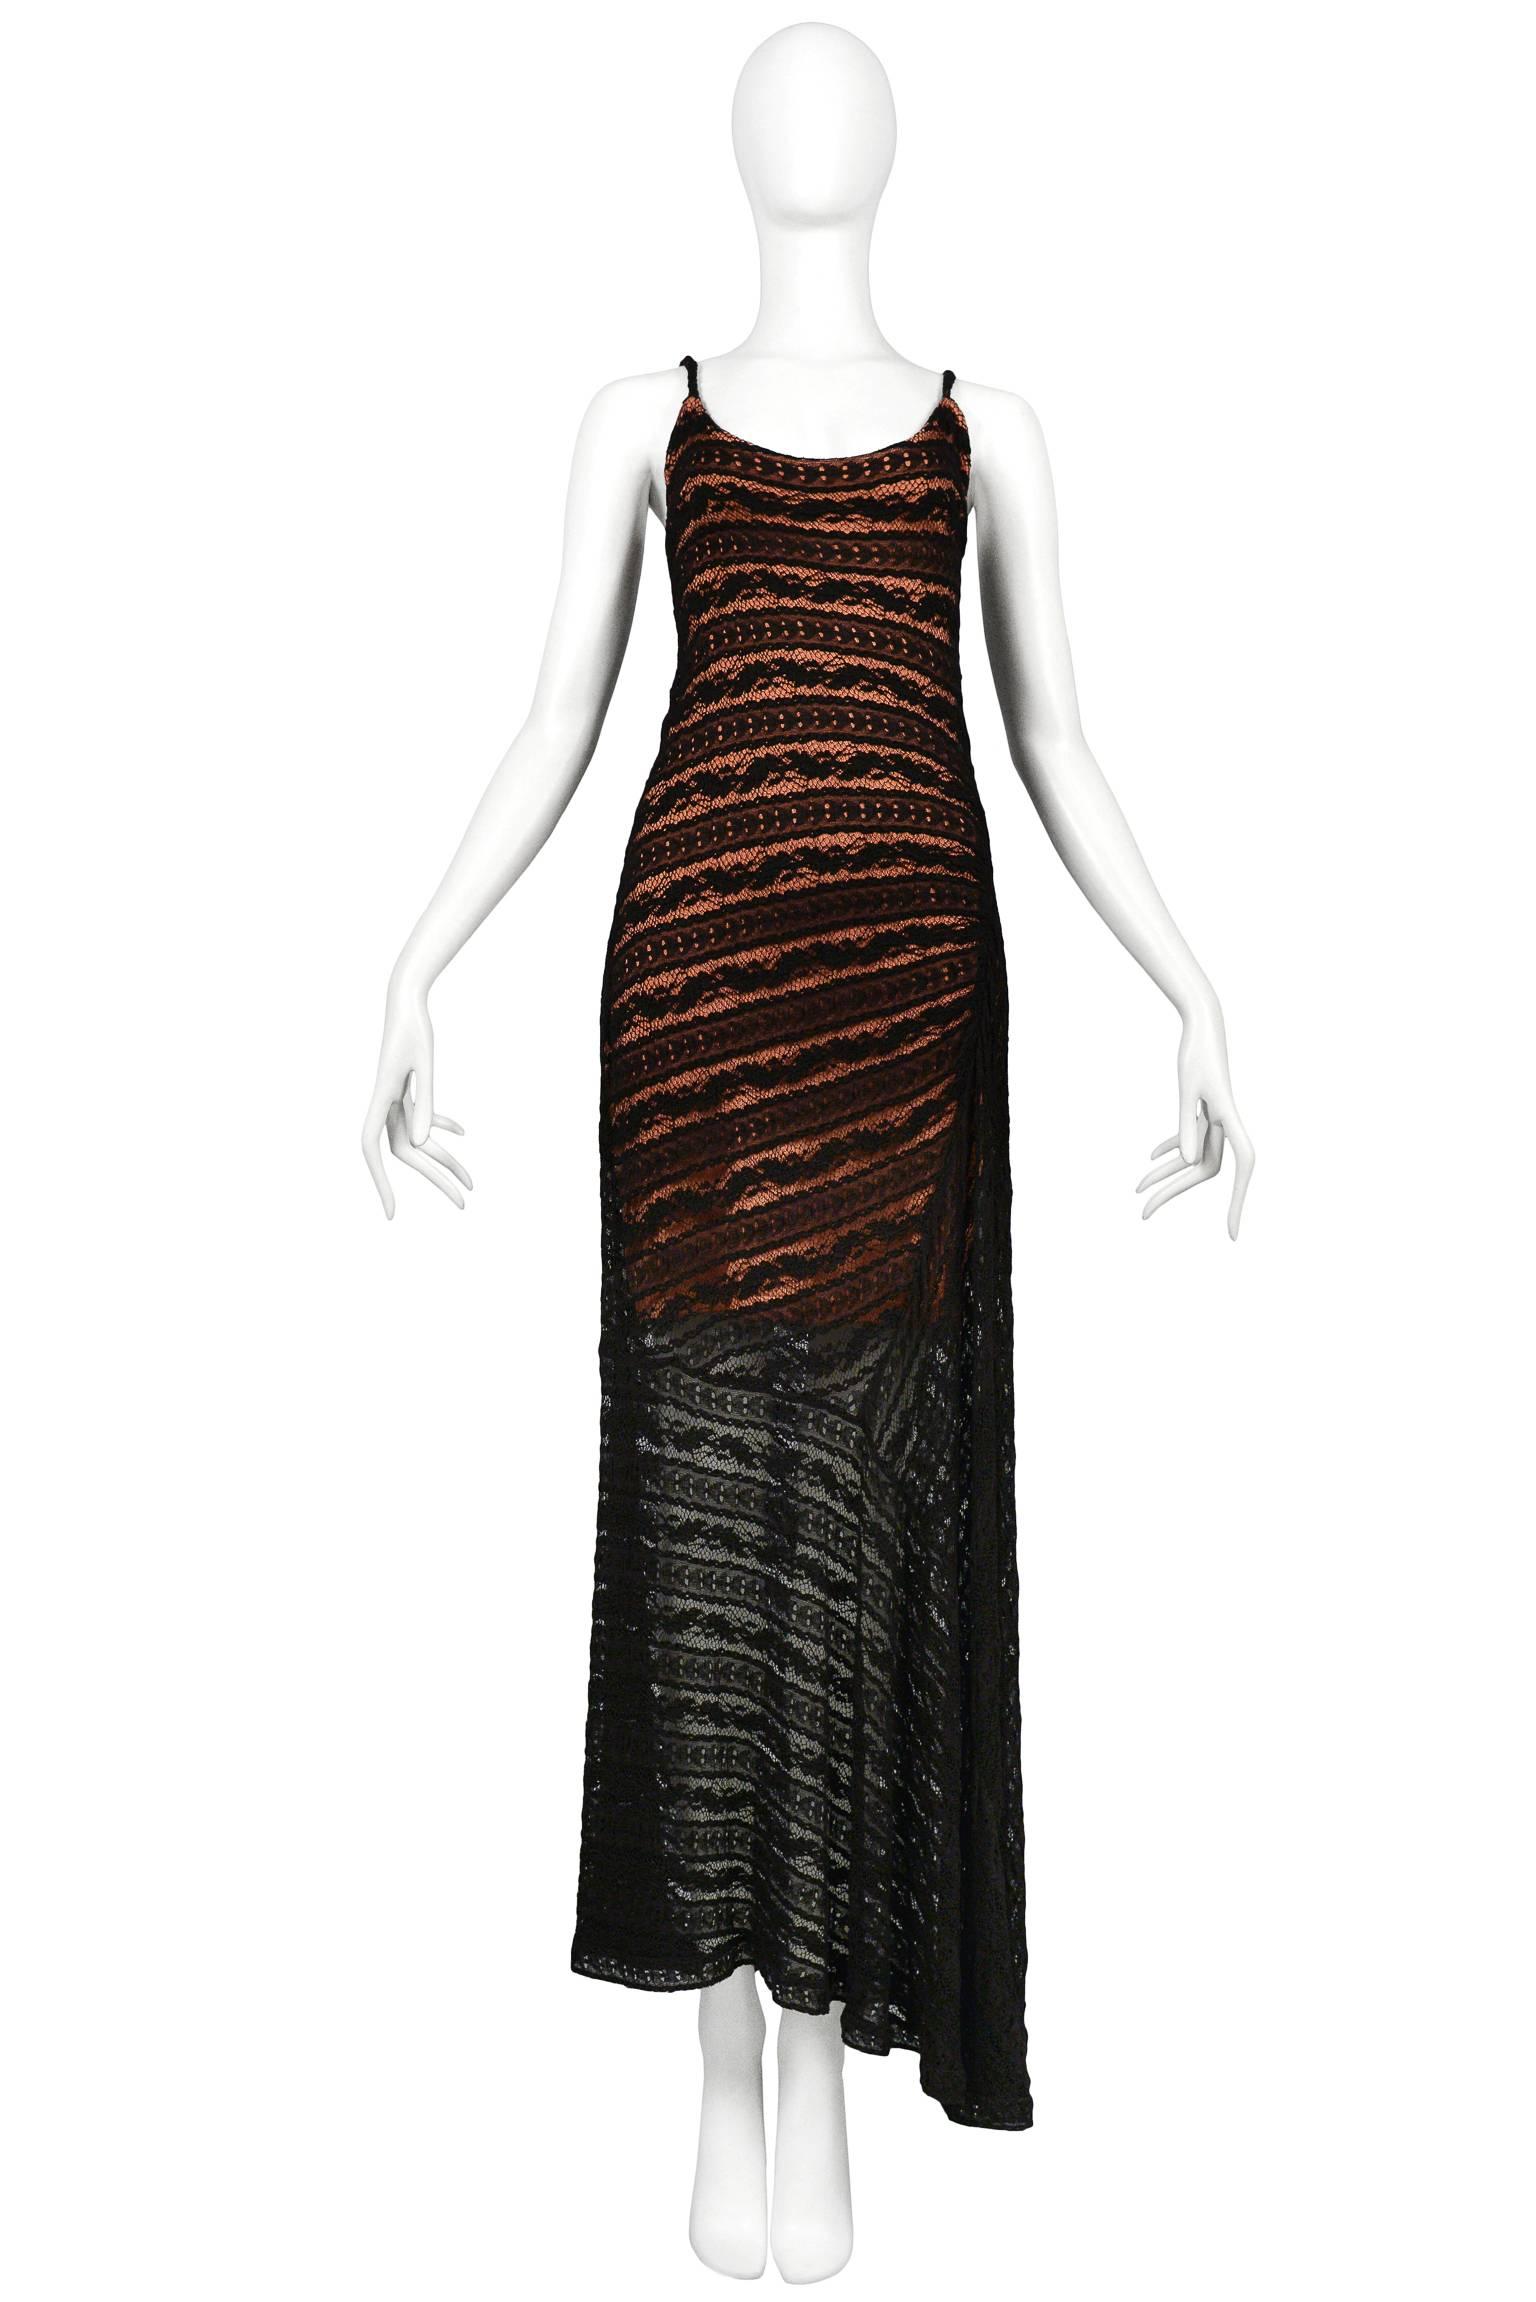 Vintage Azzedine Alaia black lace spaghetti strap dress with built in pink slip dress and bias drape at the hip. Dress features asymmetrical hem.  Circa 1993.